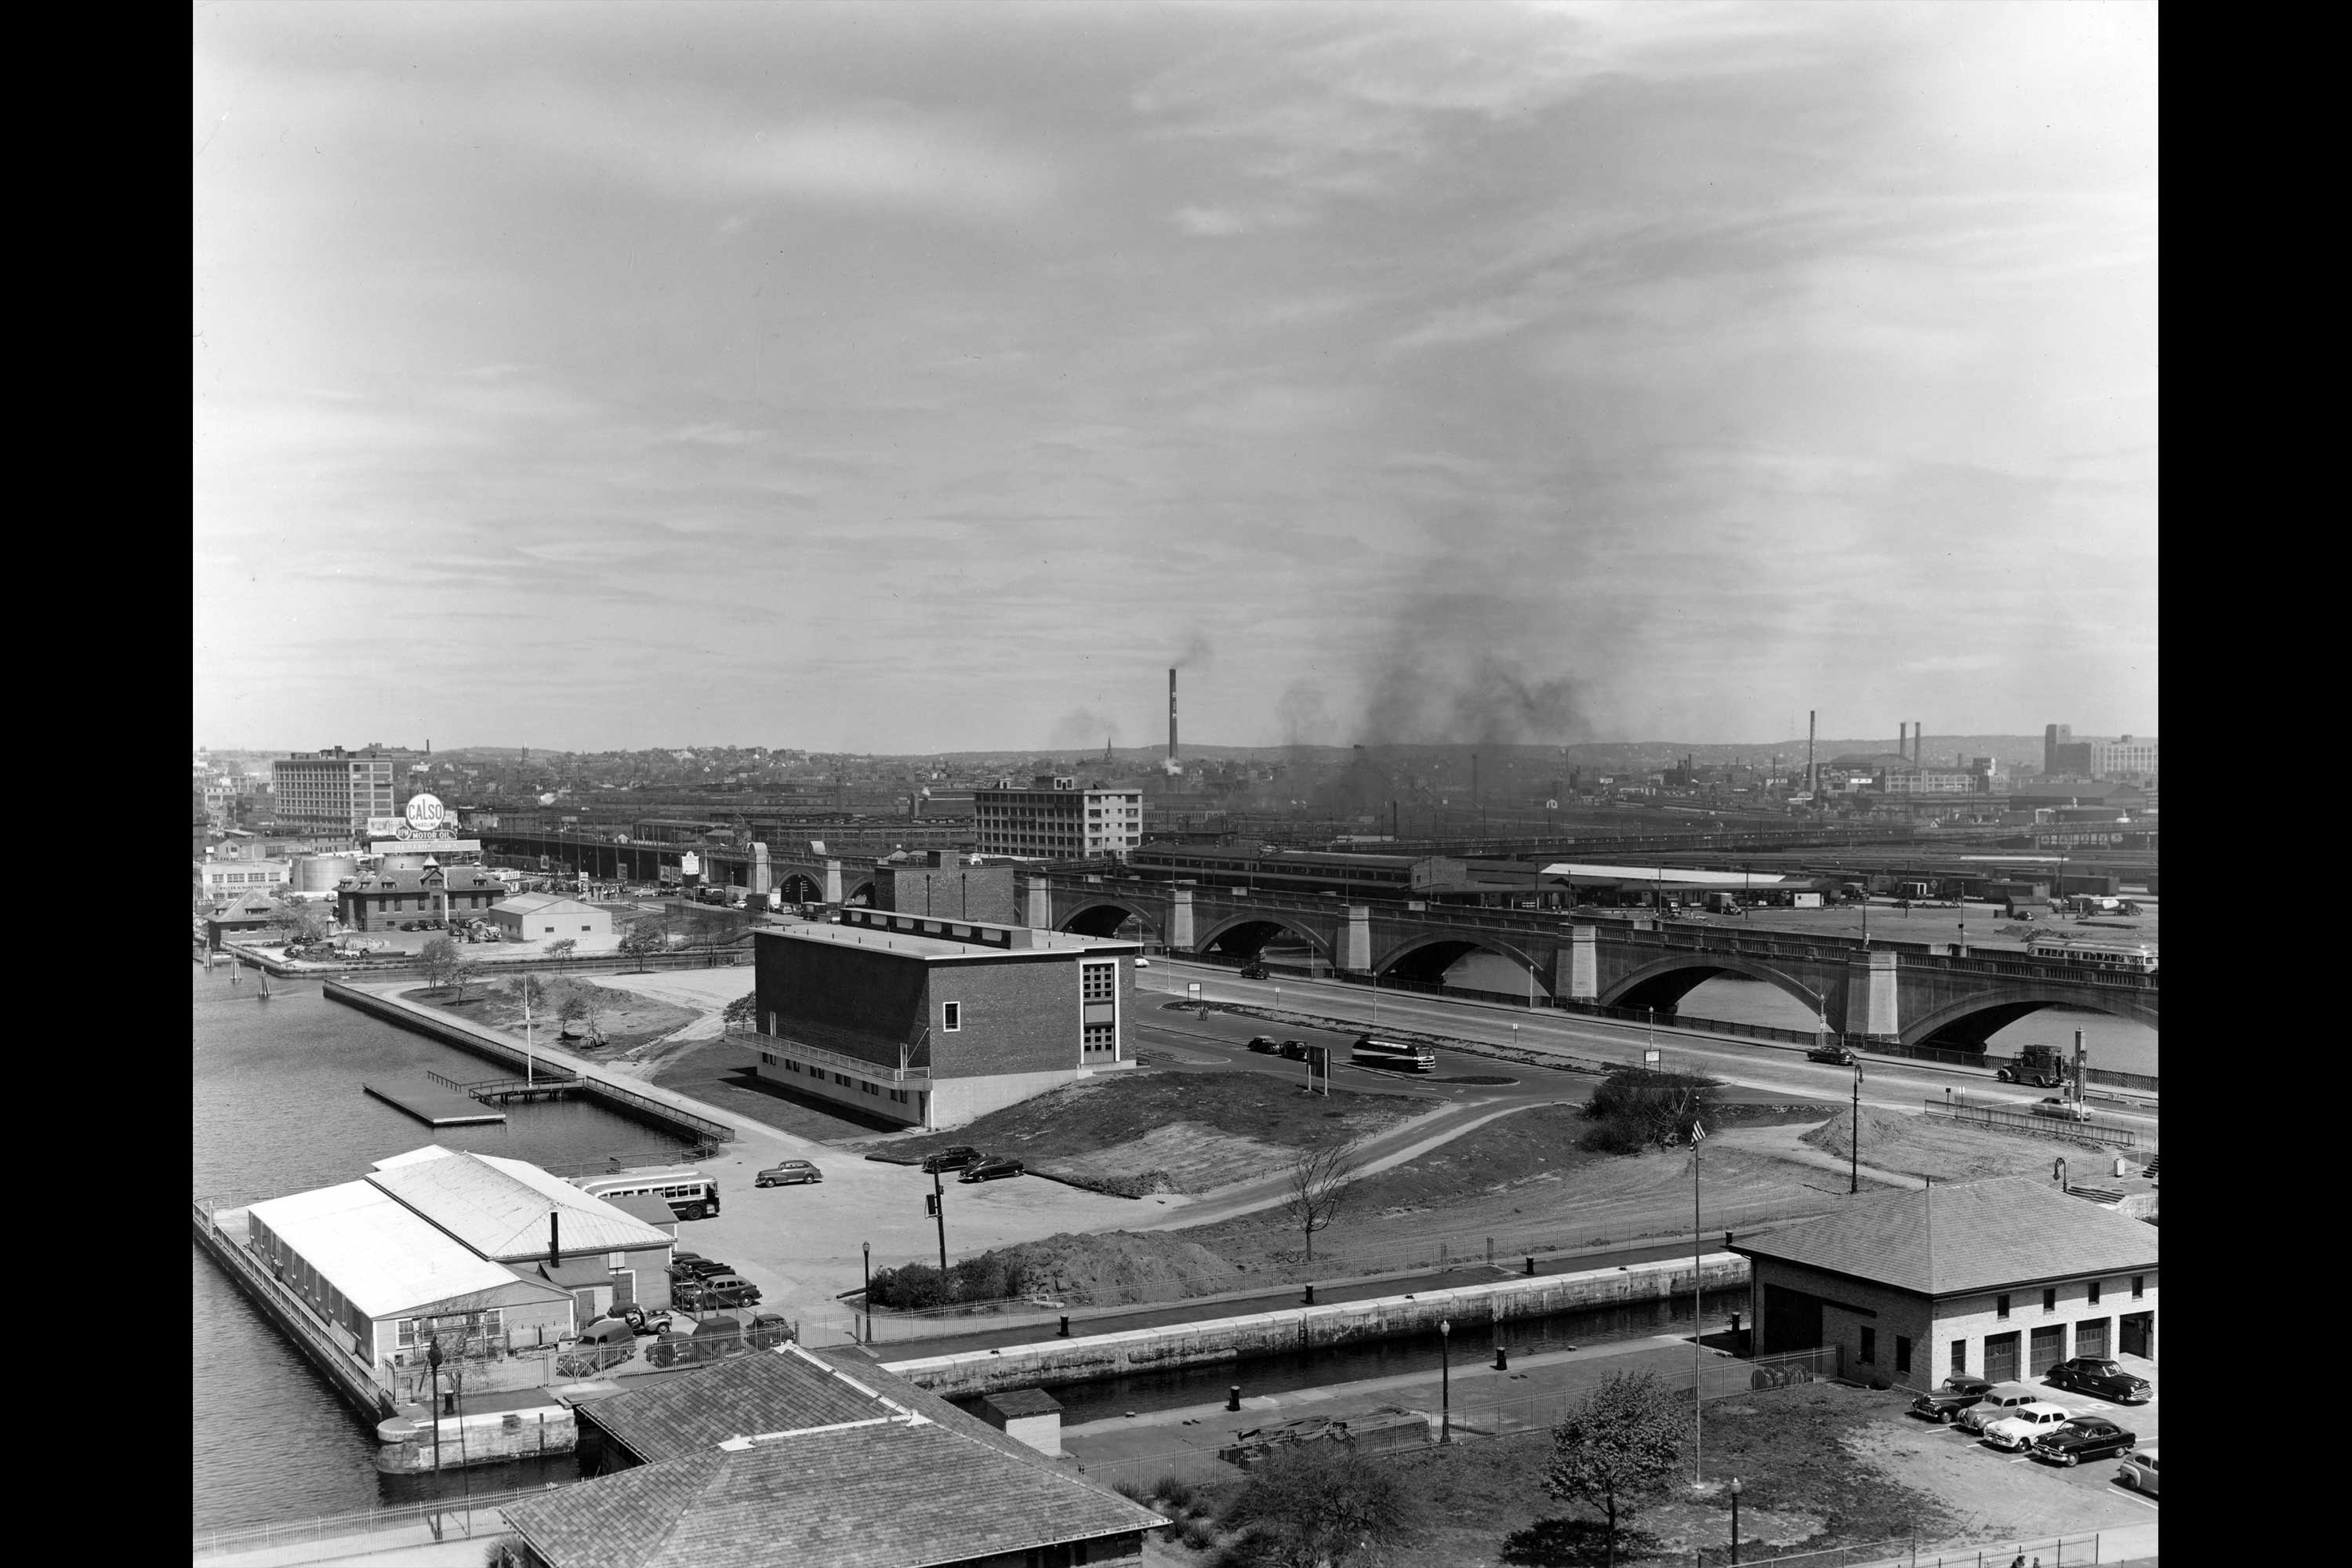 Science Park 1951. This is a photograph of Science Park in 1951 with the first Museum of Science buildings.